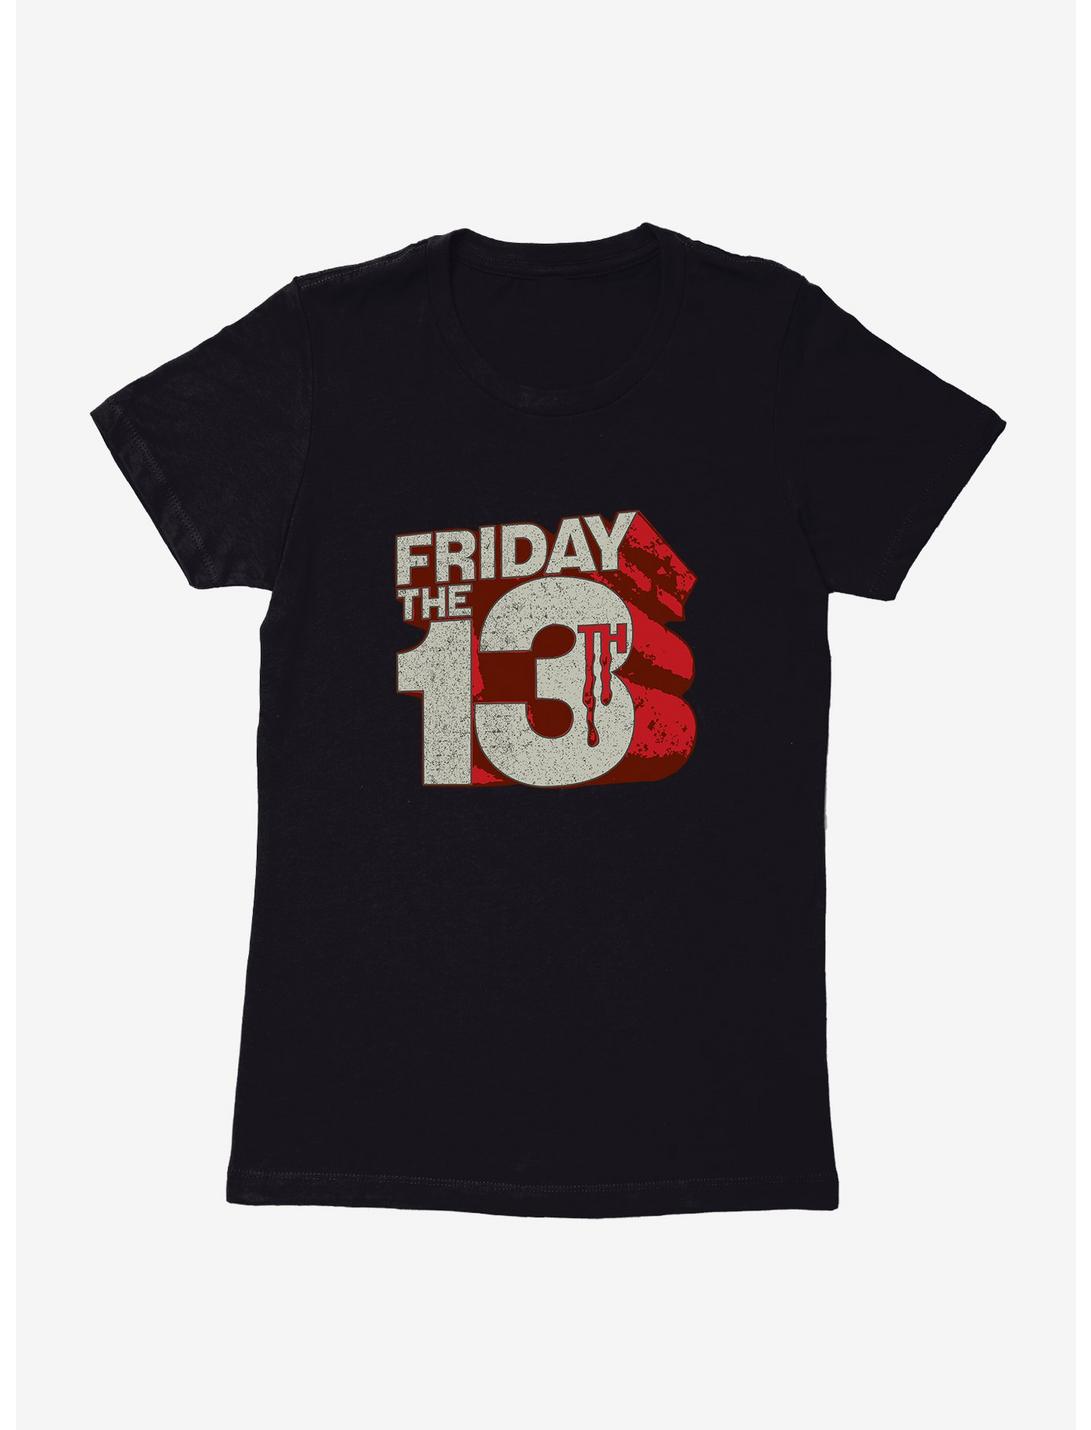 Friday The 13th Block Letters Womens T-Shirt, BLACK, hi-res